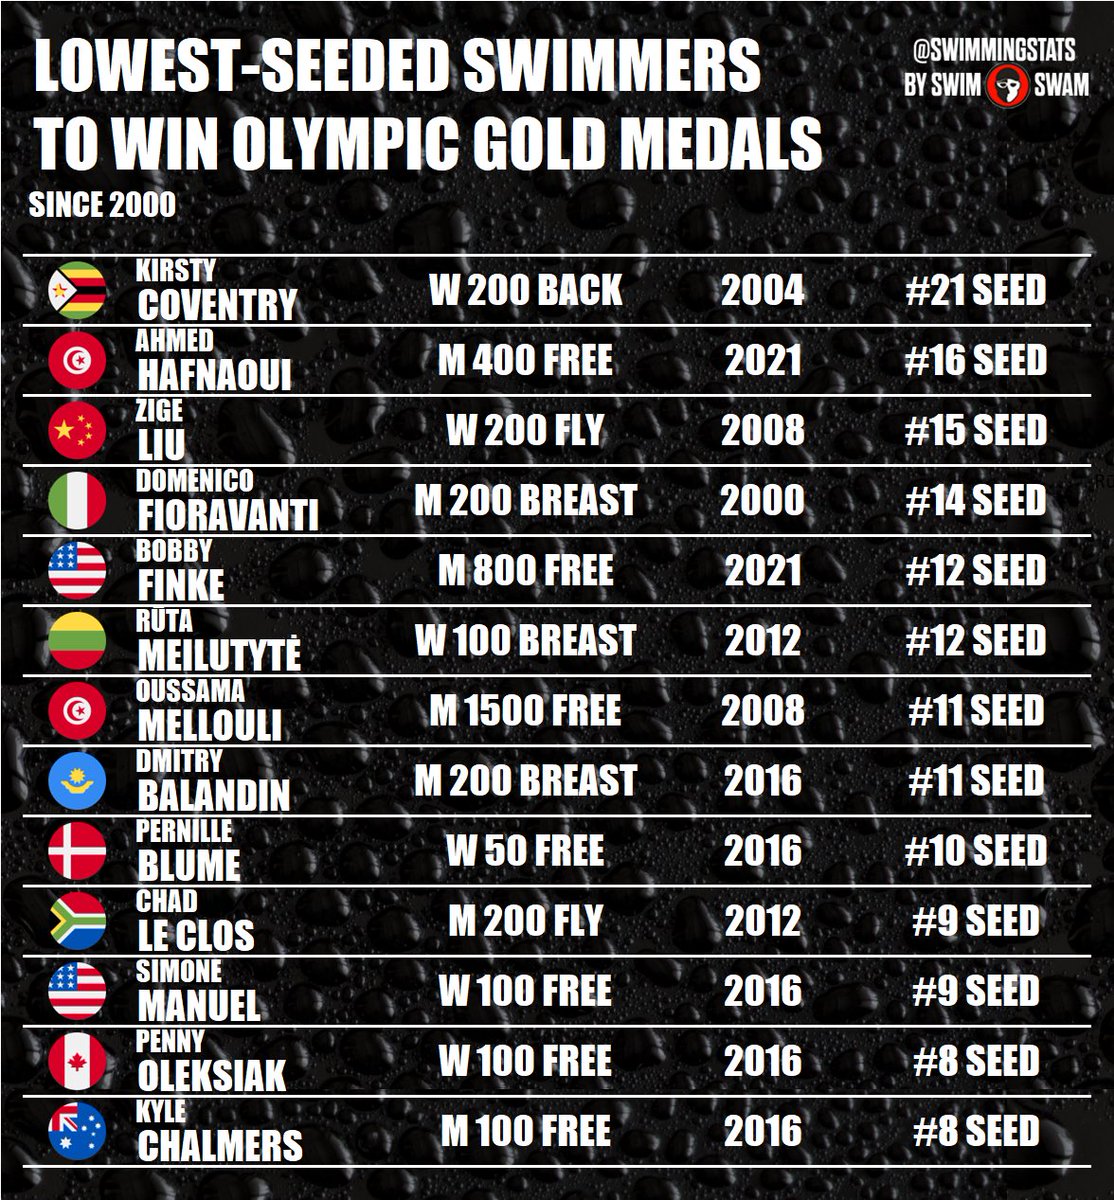 These are the lowest-seeded swimmers to win Olympic gold medals since 2000. In 2021, Ahmed Hafnaoui won the men’s 400 free in Tokyo having the 16th fastest entry time. Only Kirsty Coventry, 21st in 2004 in the women’s 200 back, had a lower seed time and won the gold since 2000.